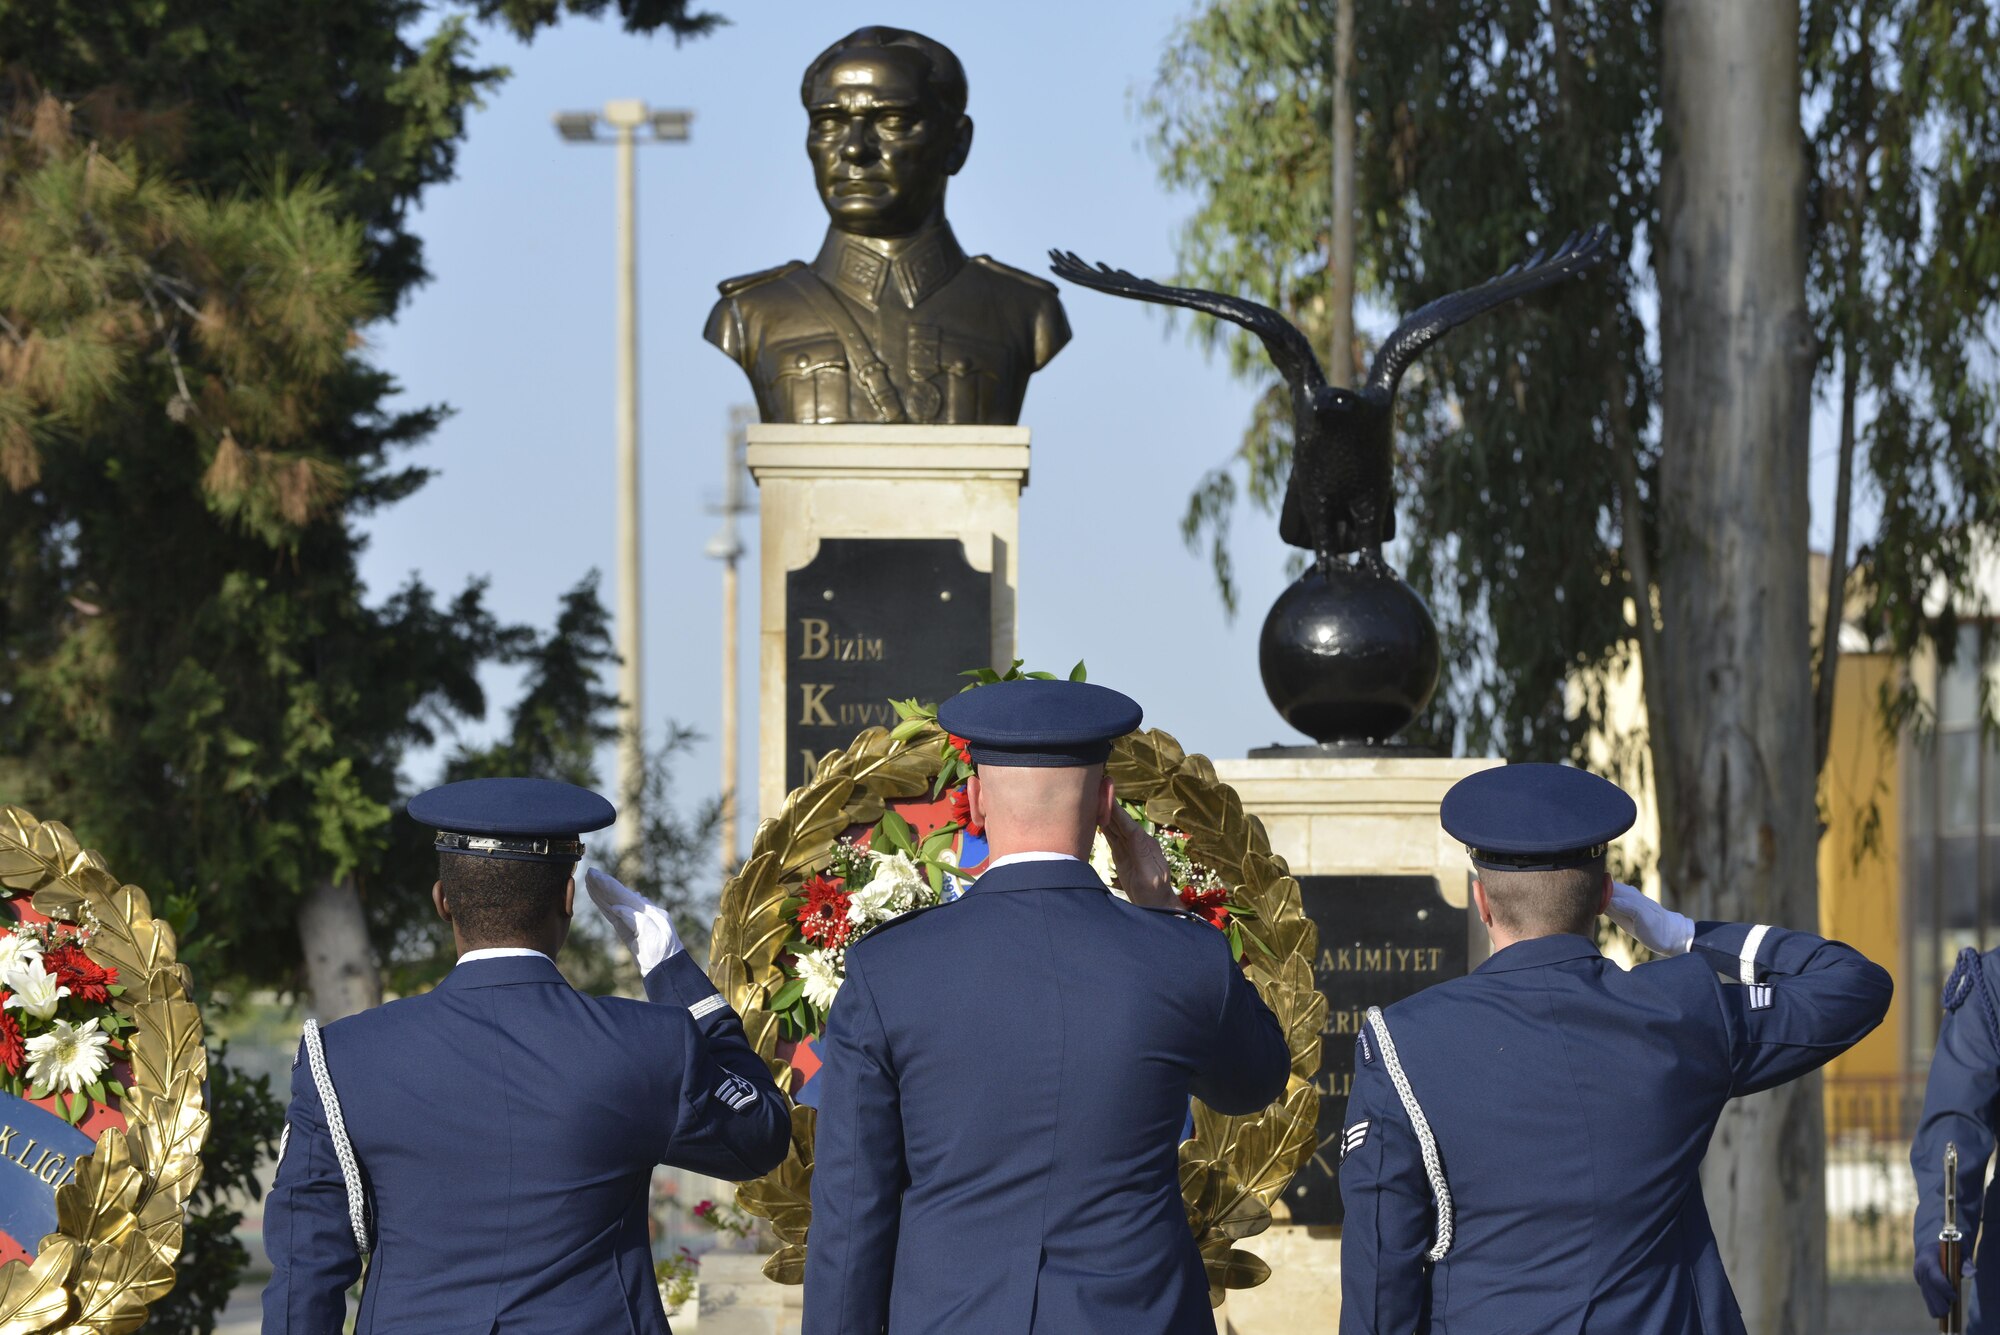 U.S. Air Force Col. Michael Manion, 39th Air Base Wing (ABW) vice commander, along with 39th ABW honor guardsmen, salute a statue of Mustafa Kemal Ataturk during a memorial ceremony Nov. 10, 2016, at Incirlik Air Base, Turkey. U.S. service members were present during the ceremony to show support and respect for Ataturk. (U.S. Air Force photo by Senior Airman John Nieves Camacho)